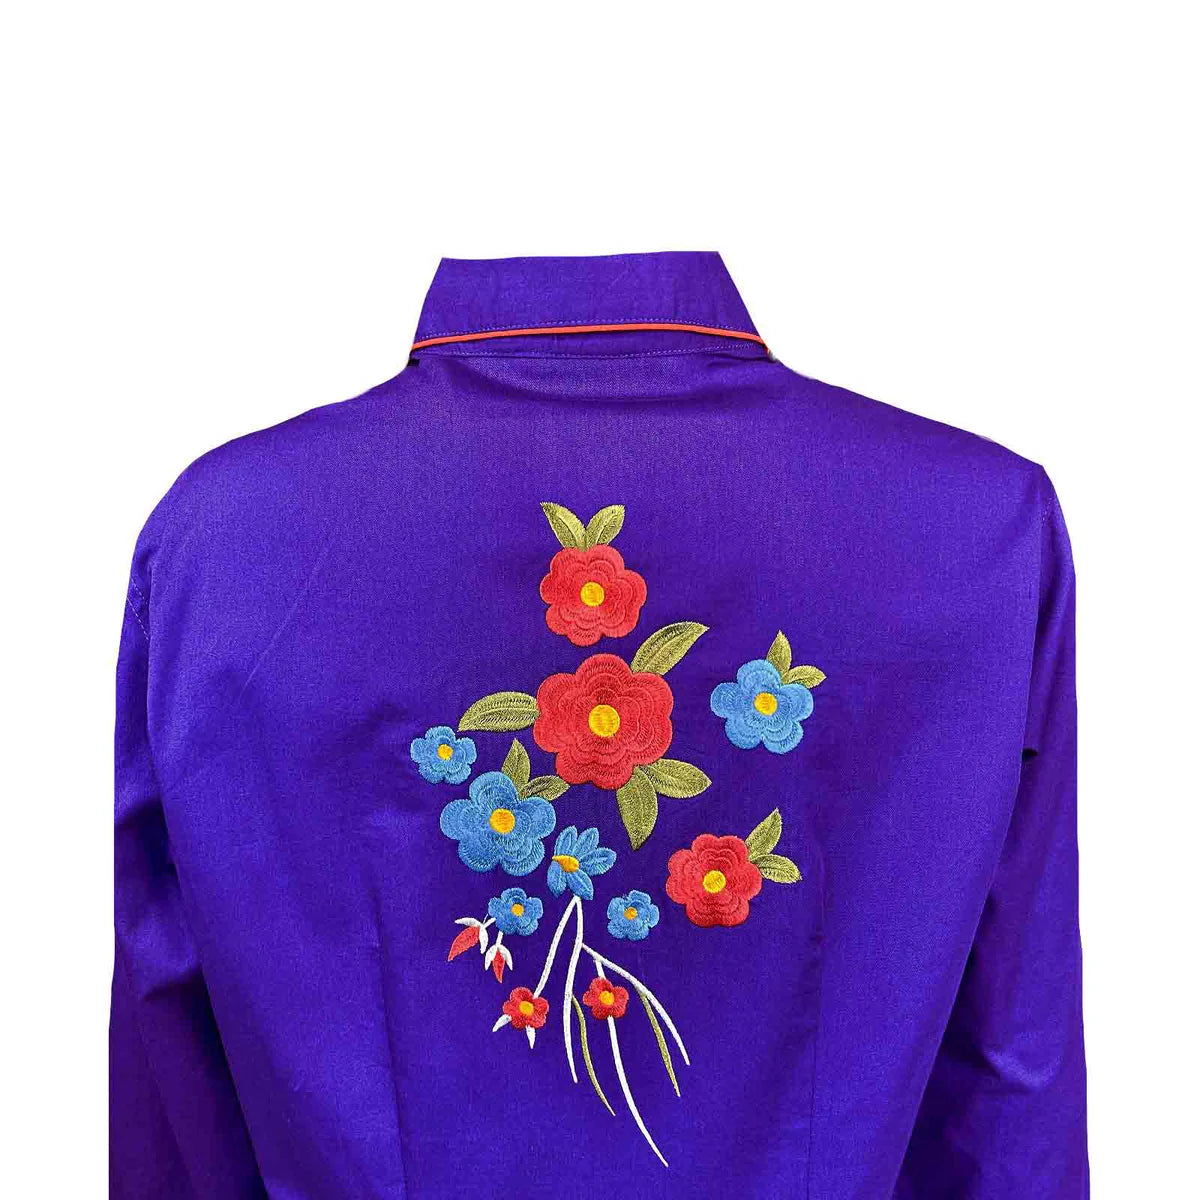 Rockmount Ranch Wear Ladies' Vintage Inspired Western Shirt Embroidered Blooms on Purple Back